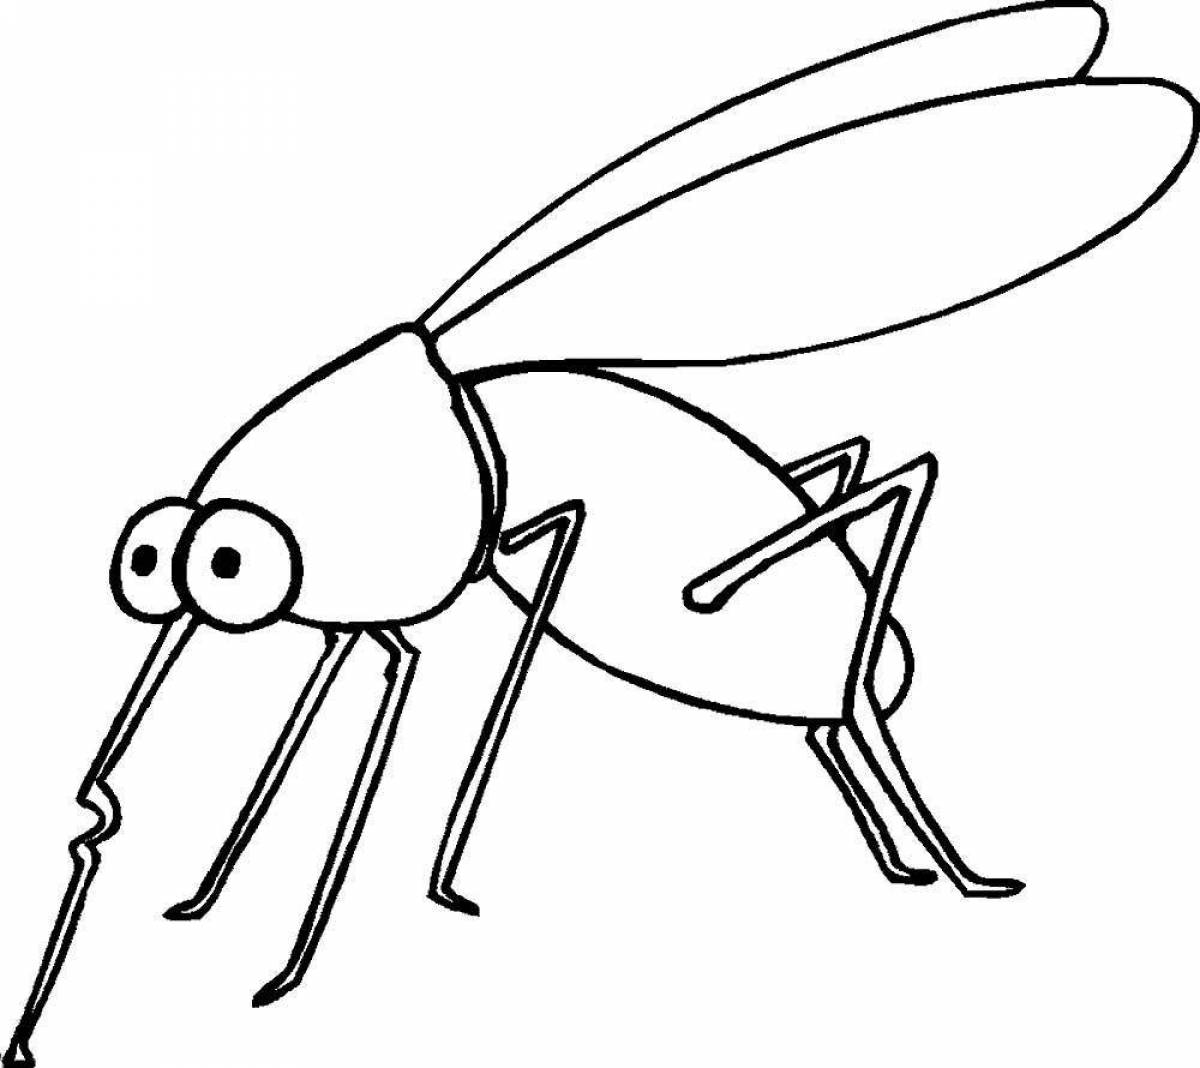 Coloring pages with playful insects for kids